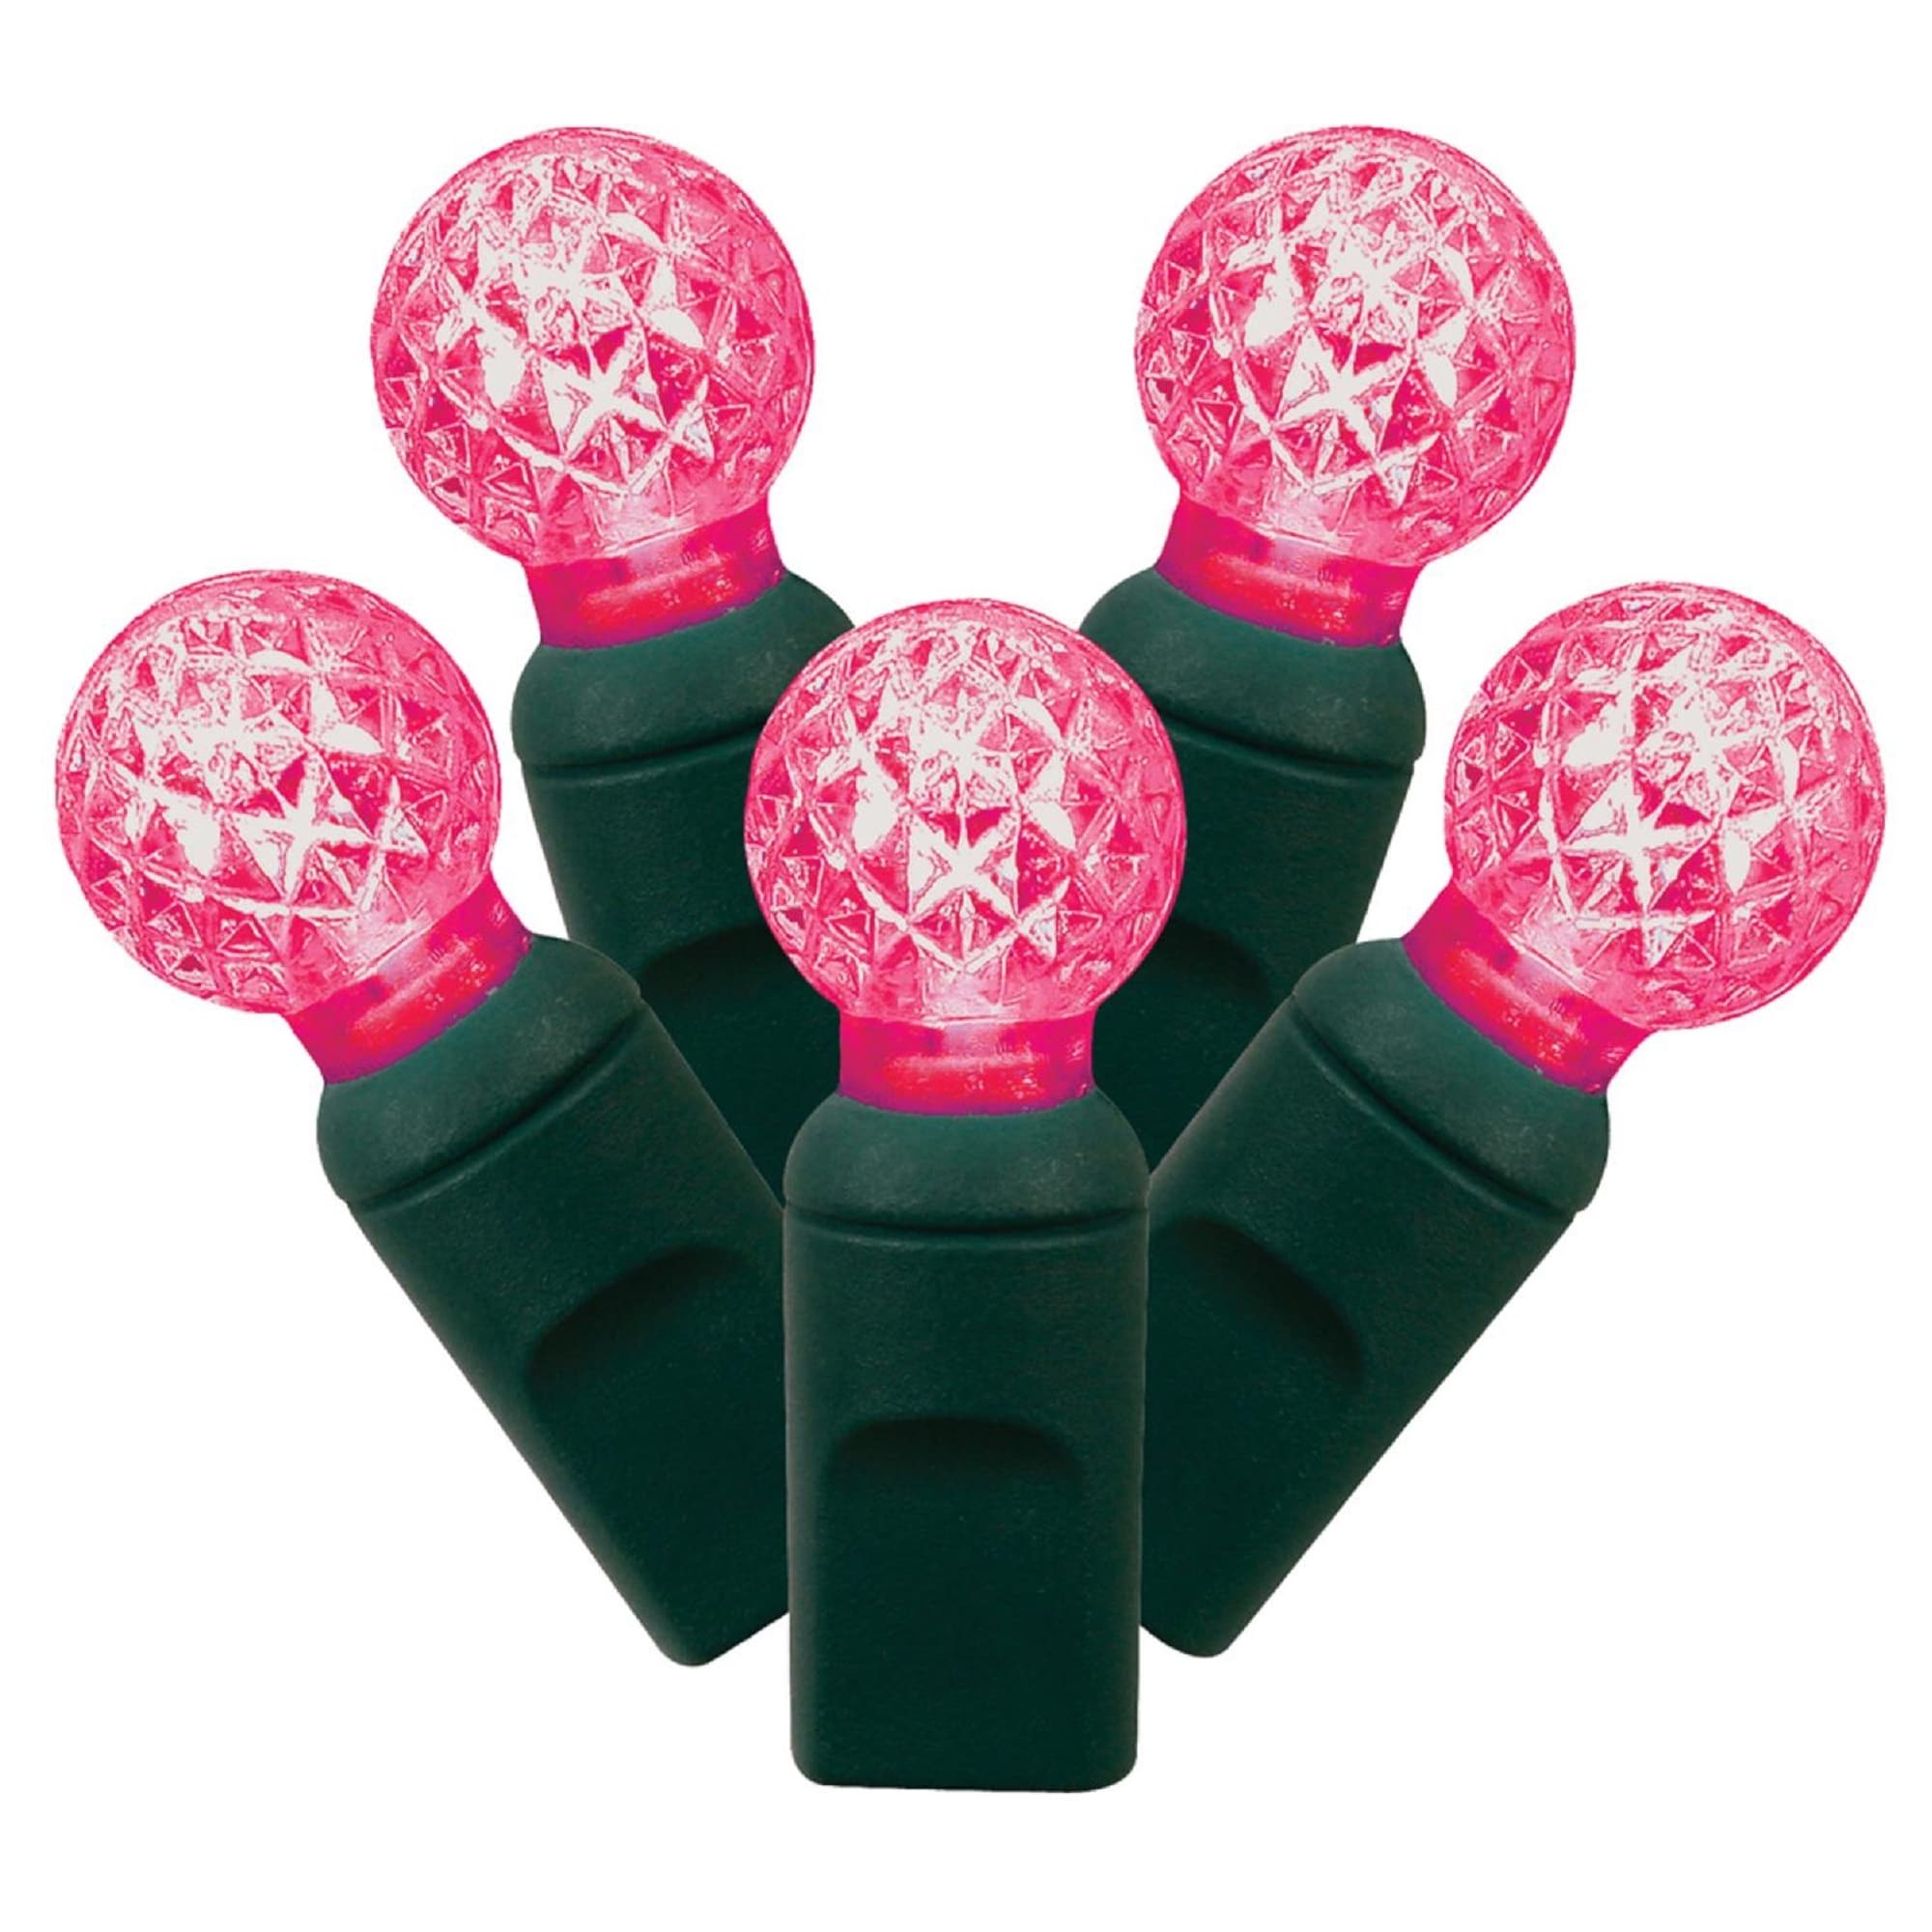 100 Battery Operated Magenta Pink Berry Christmas Lights - 33 ft